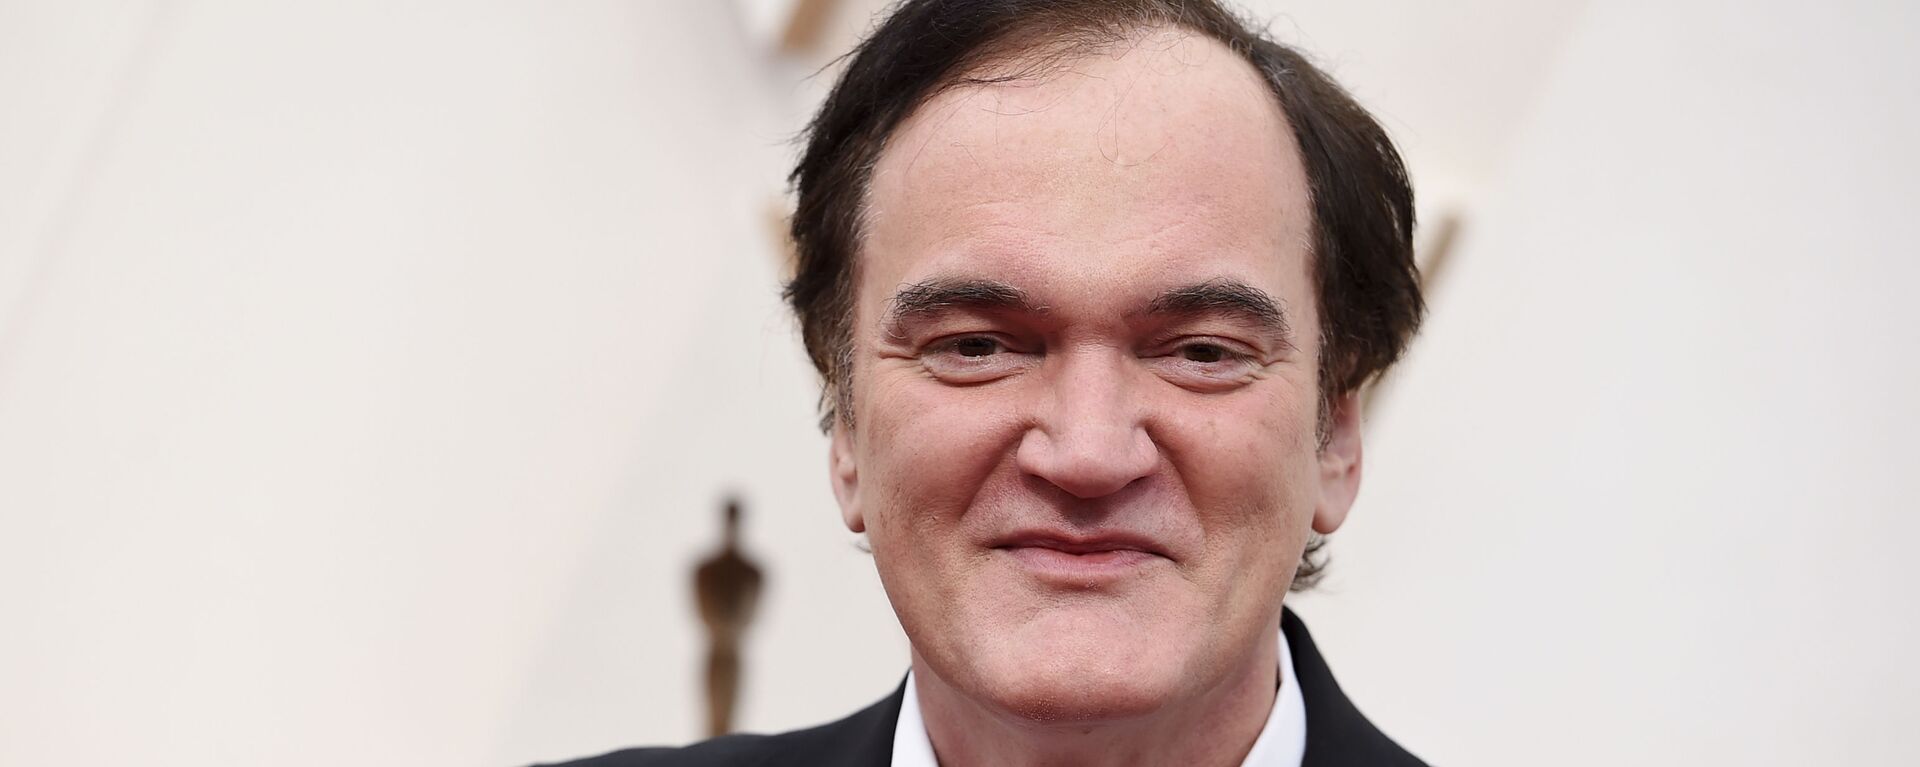 Quentin Tarantino arrives at the Oscars on Sunday, Feb. 9, 2020, at the Dolby Theatre in Los Angeles - Sputnik International, 1920, 01.07.2021